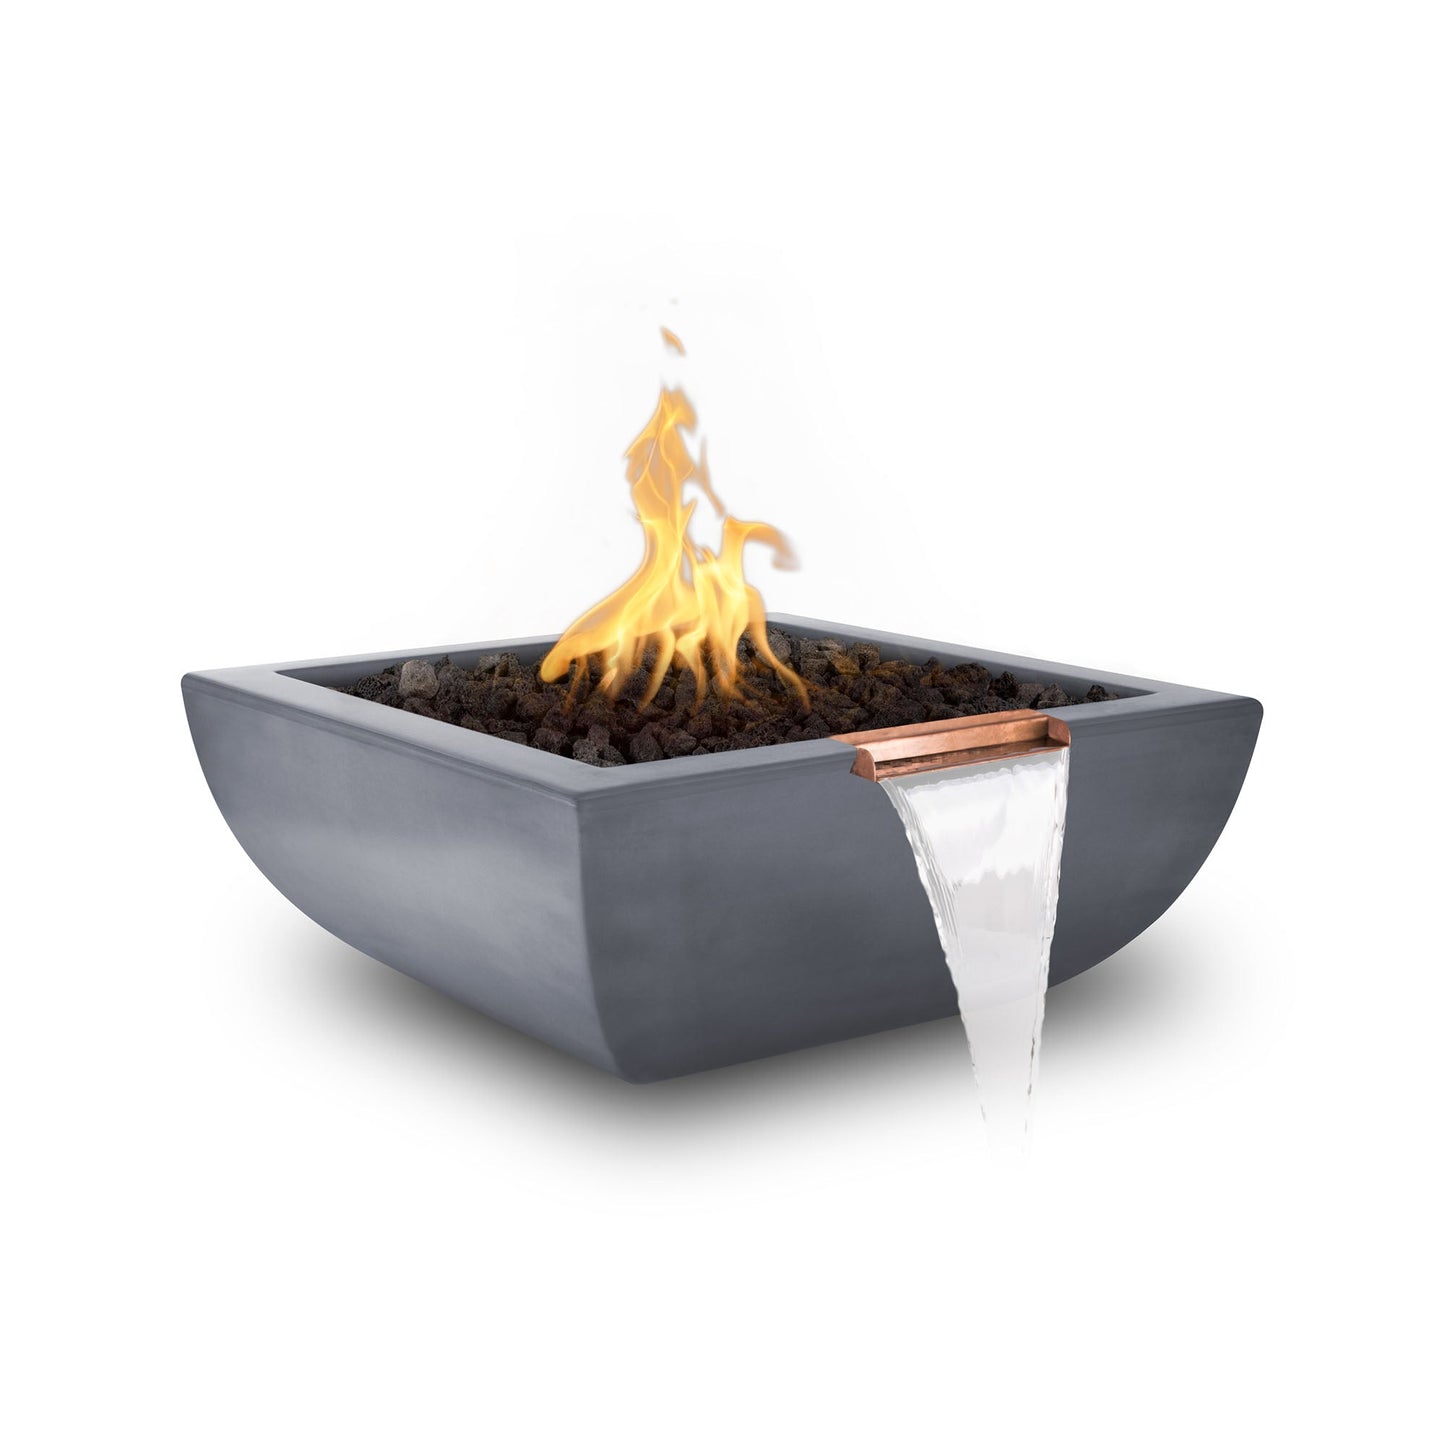 The Outdoor Plus Square Avalon 24" Ash GFRC Concrete Liquid Propane Fire & Water Bowl with Match Lit with Flame Sense Ignition